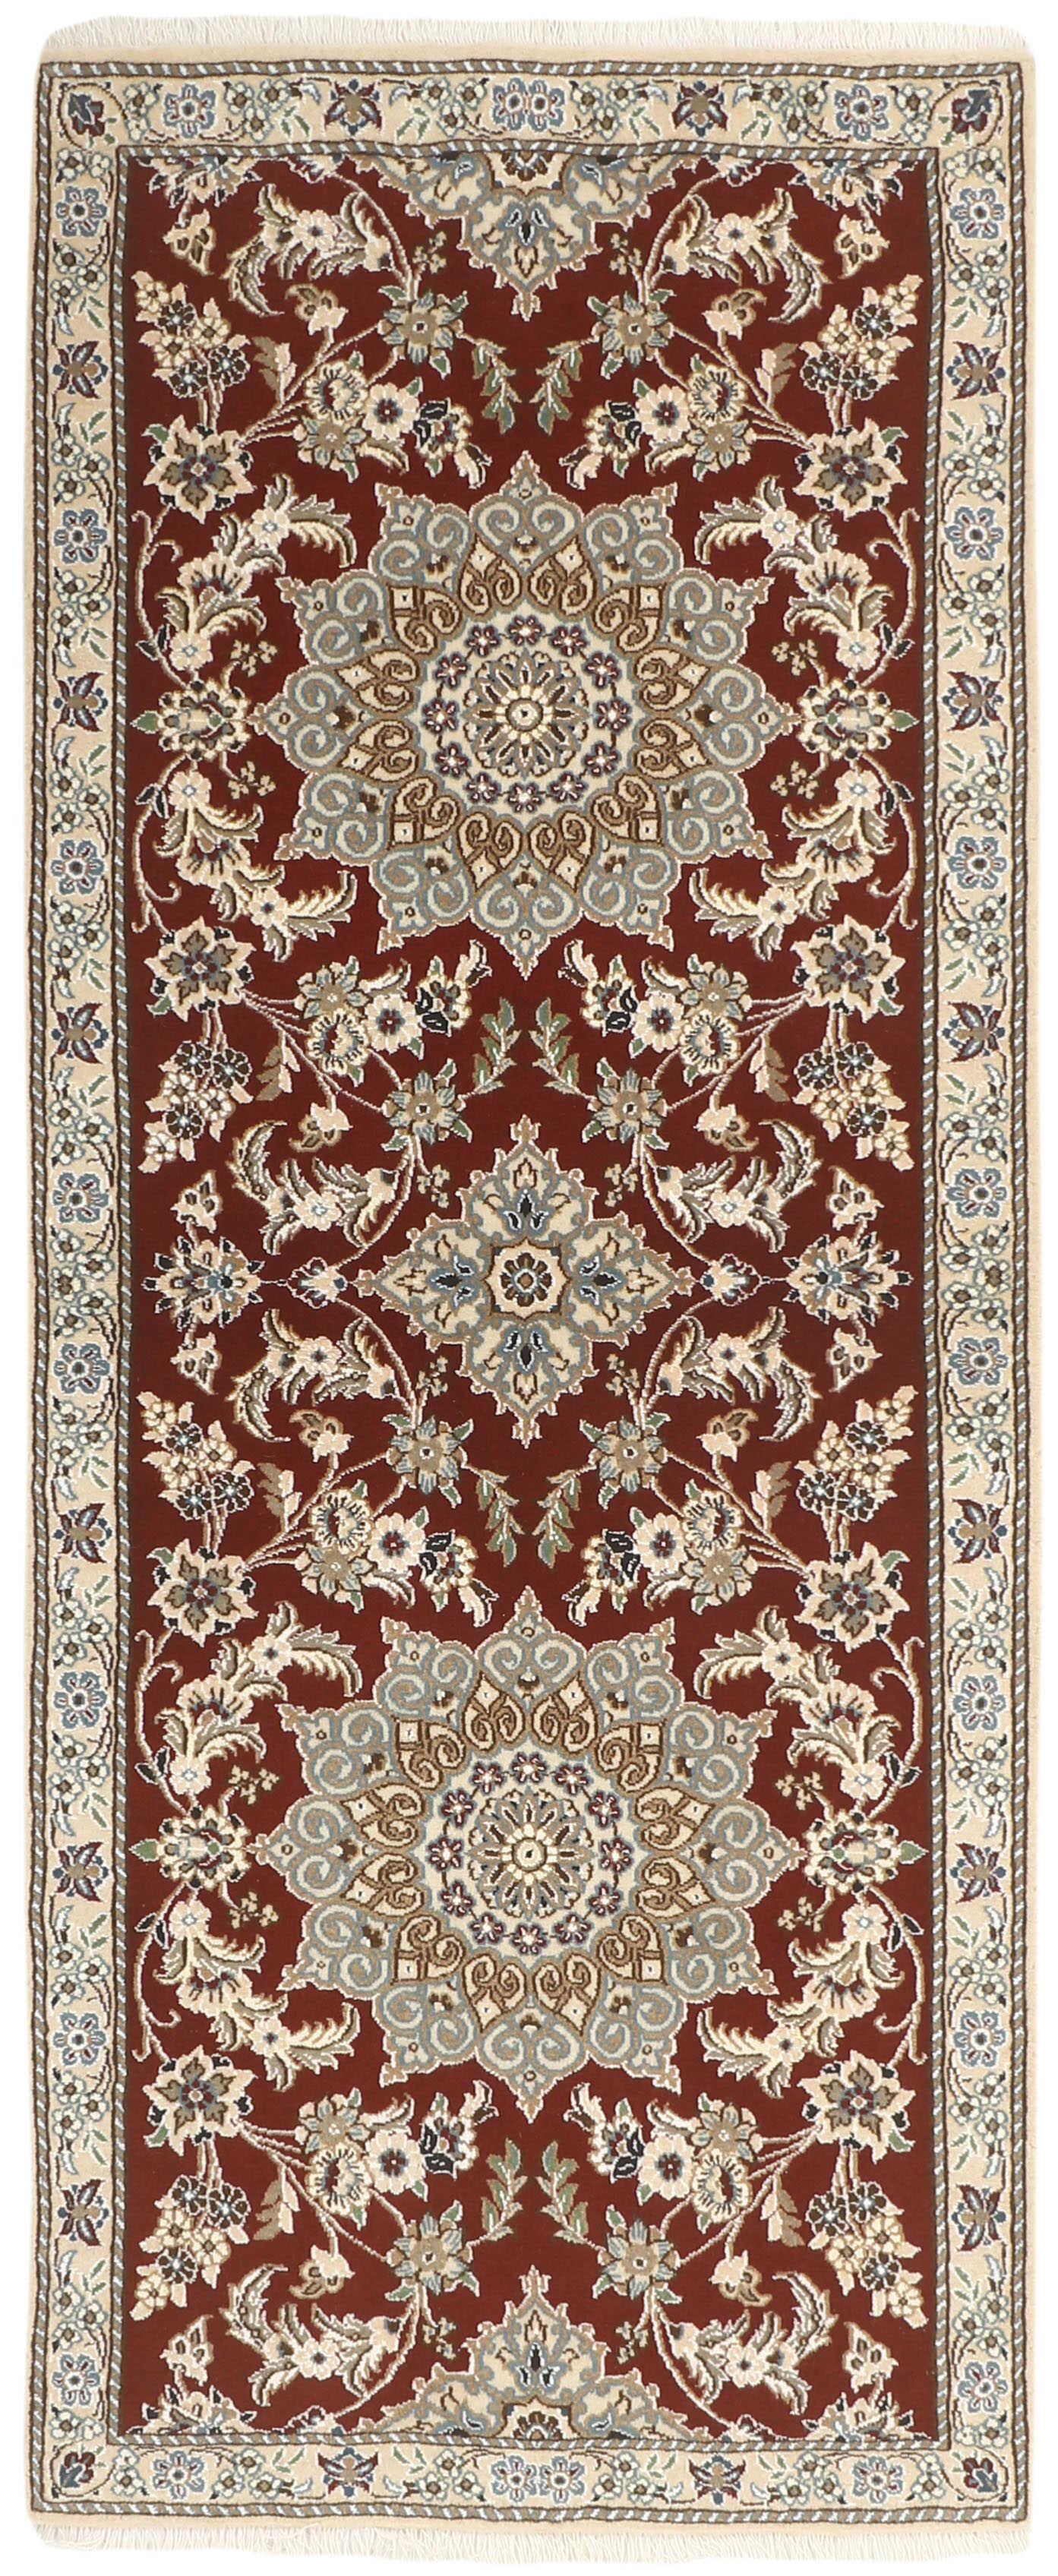 Authentic oriental runner with traditional floral design in red